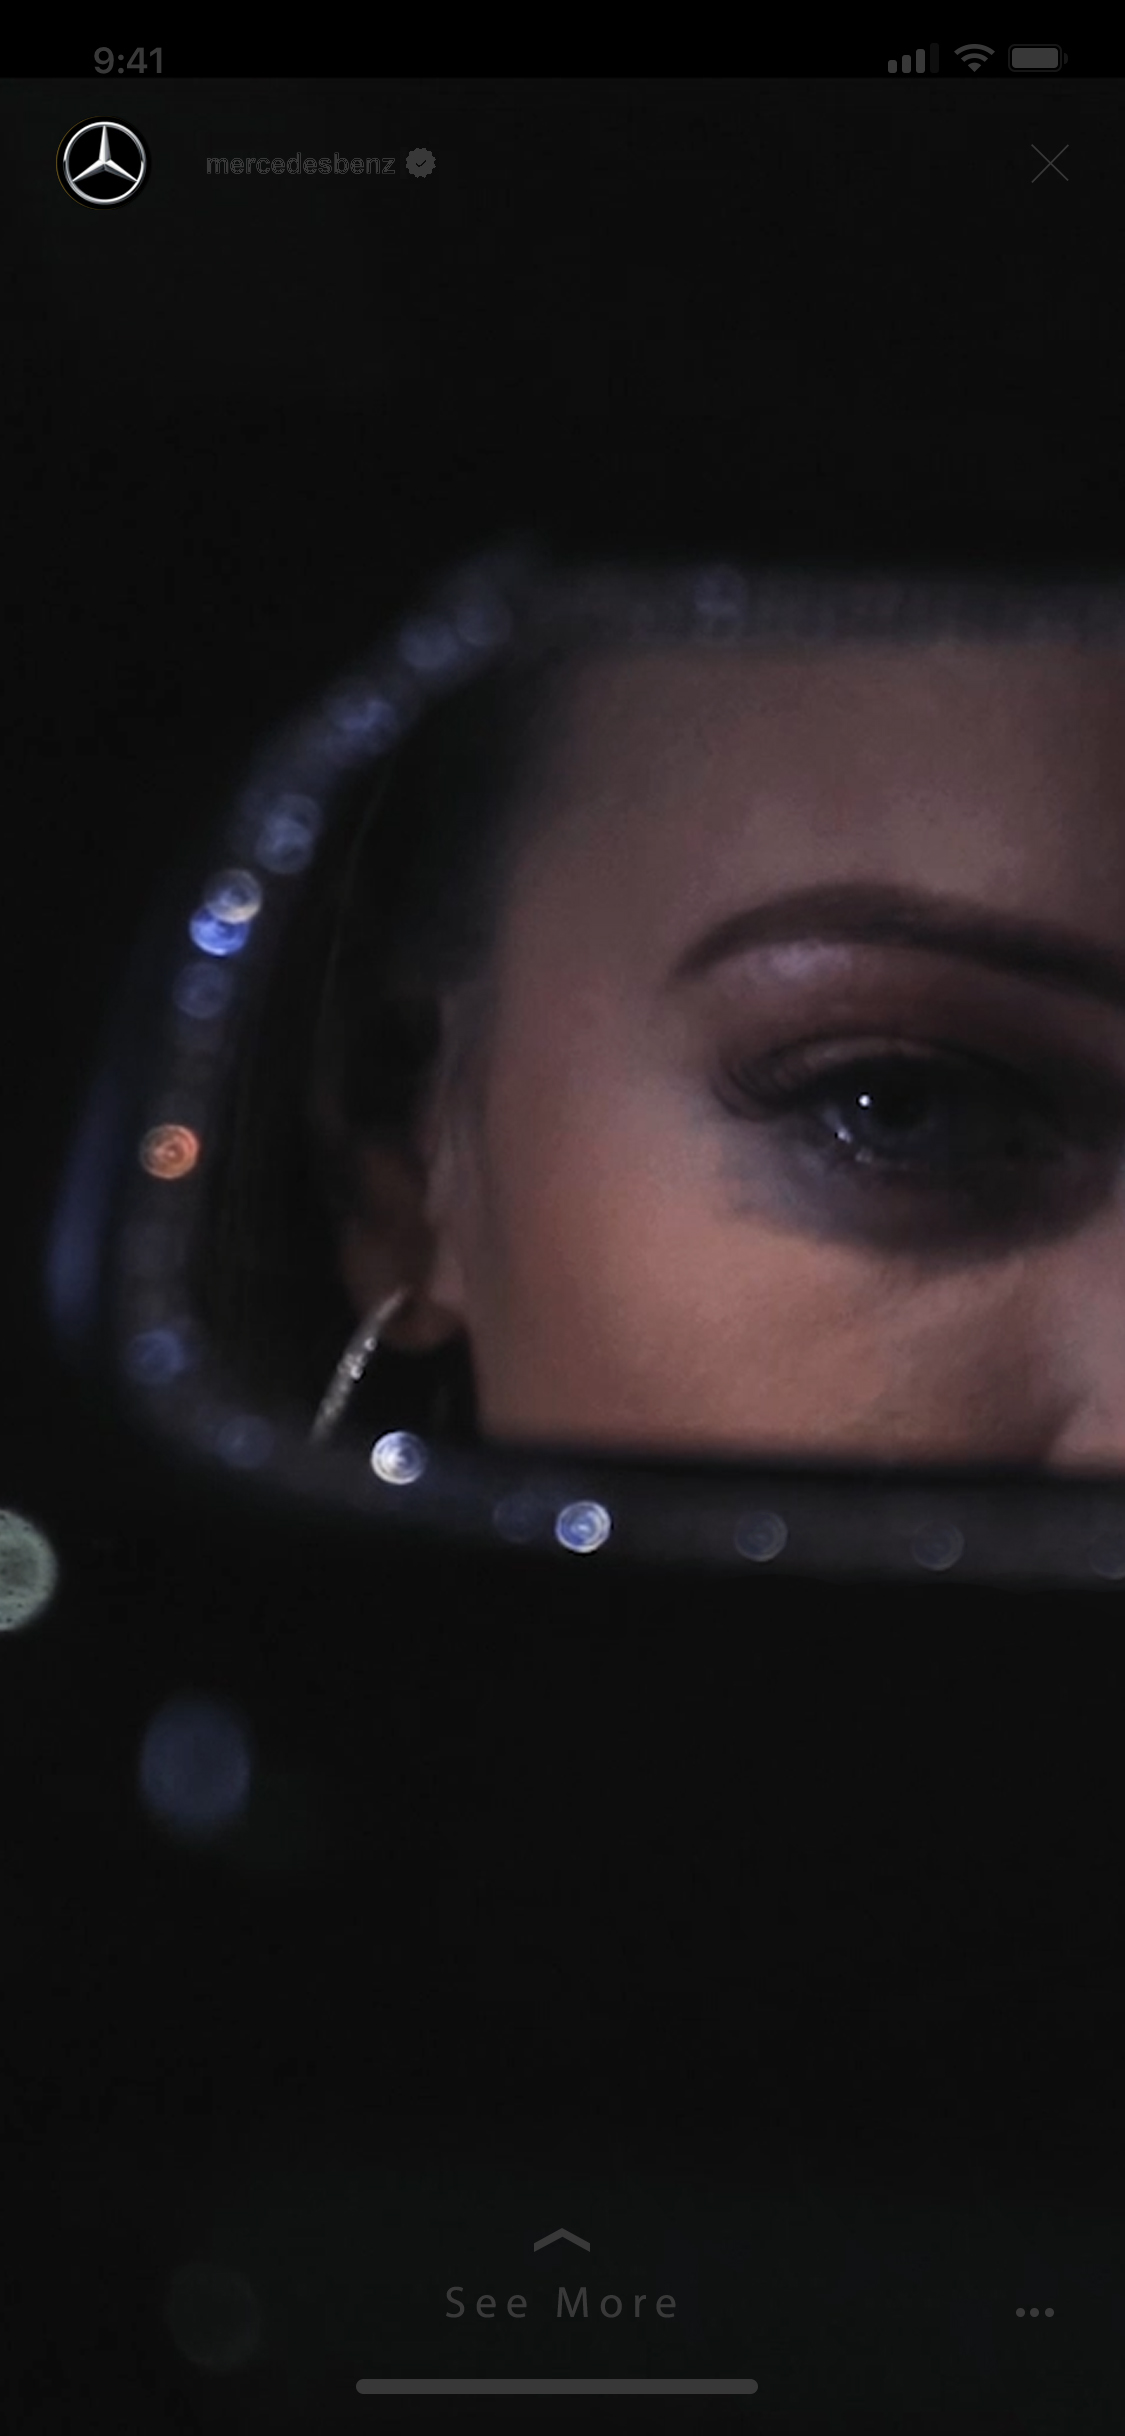 Short film by Wahiba collaborating with Mercedes Benz and Swarovski.